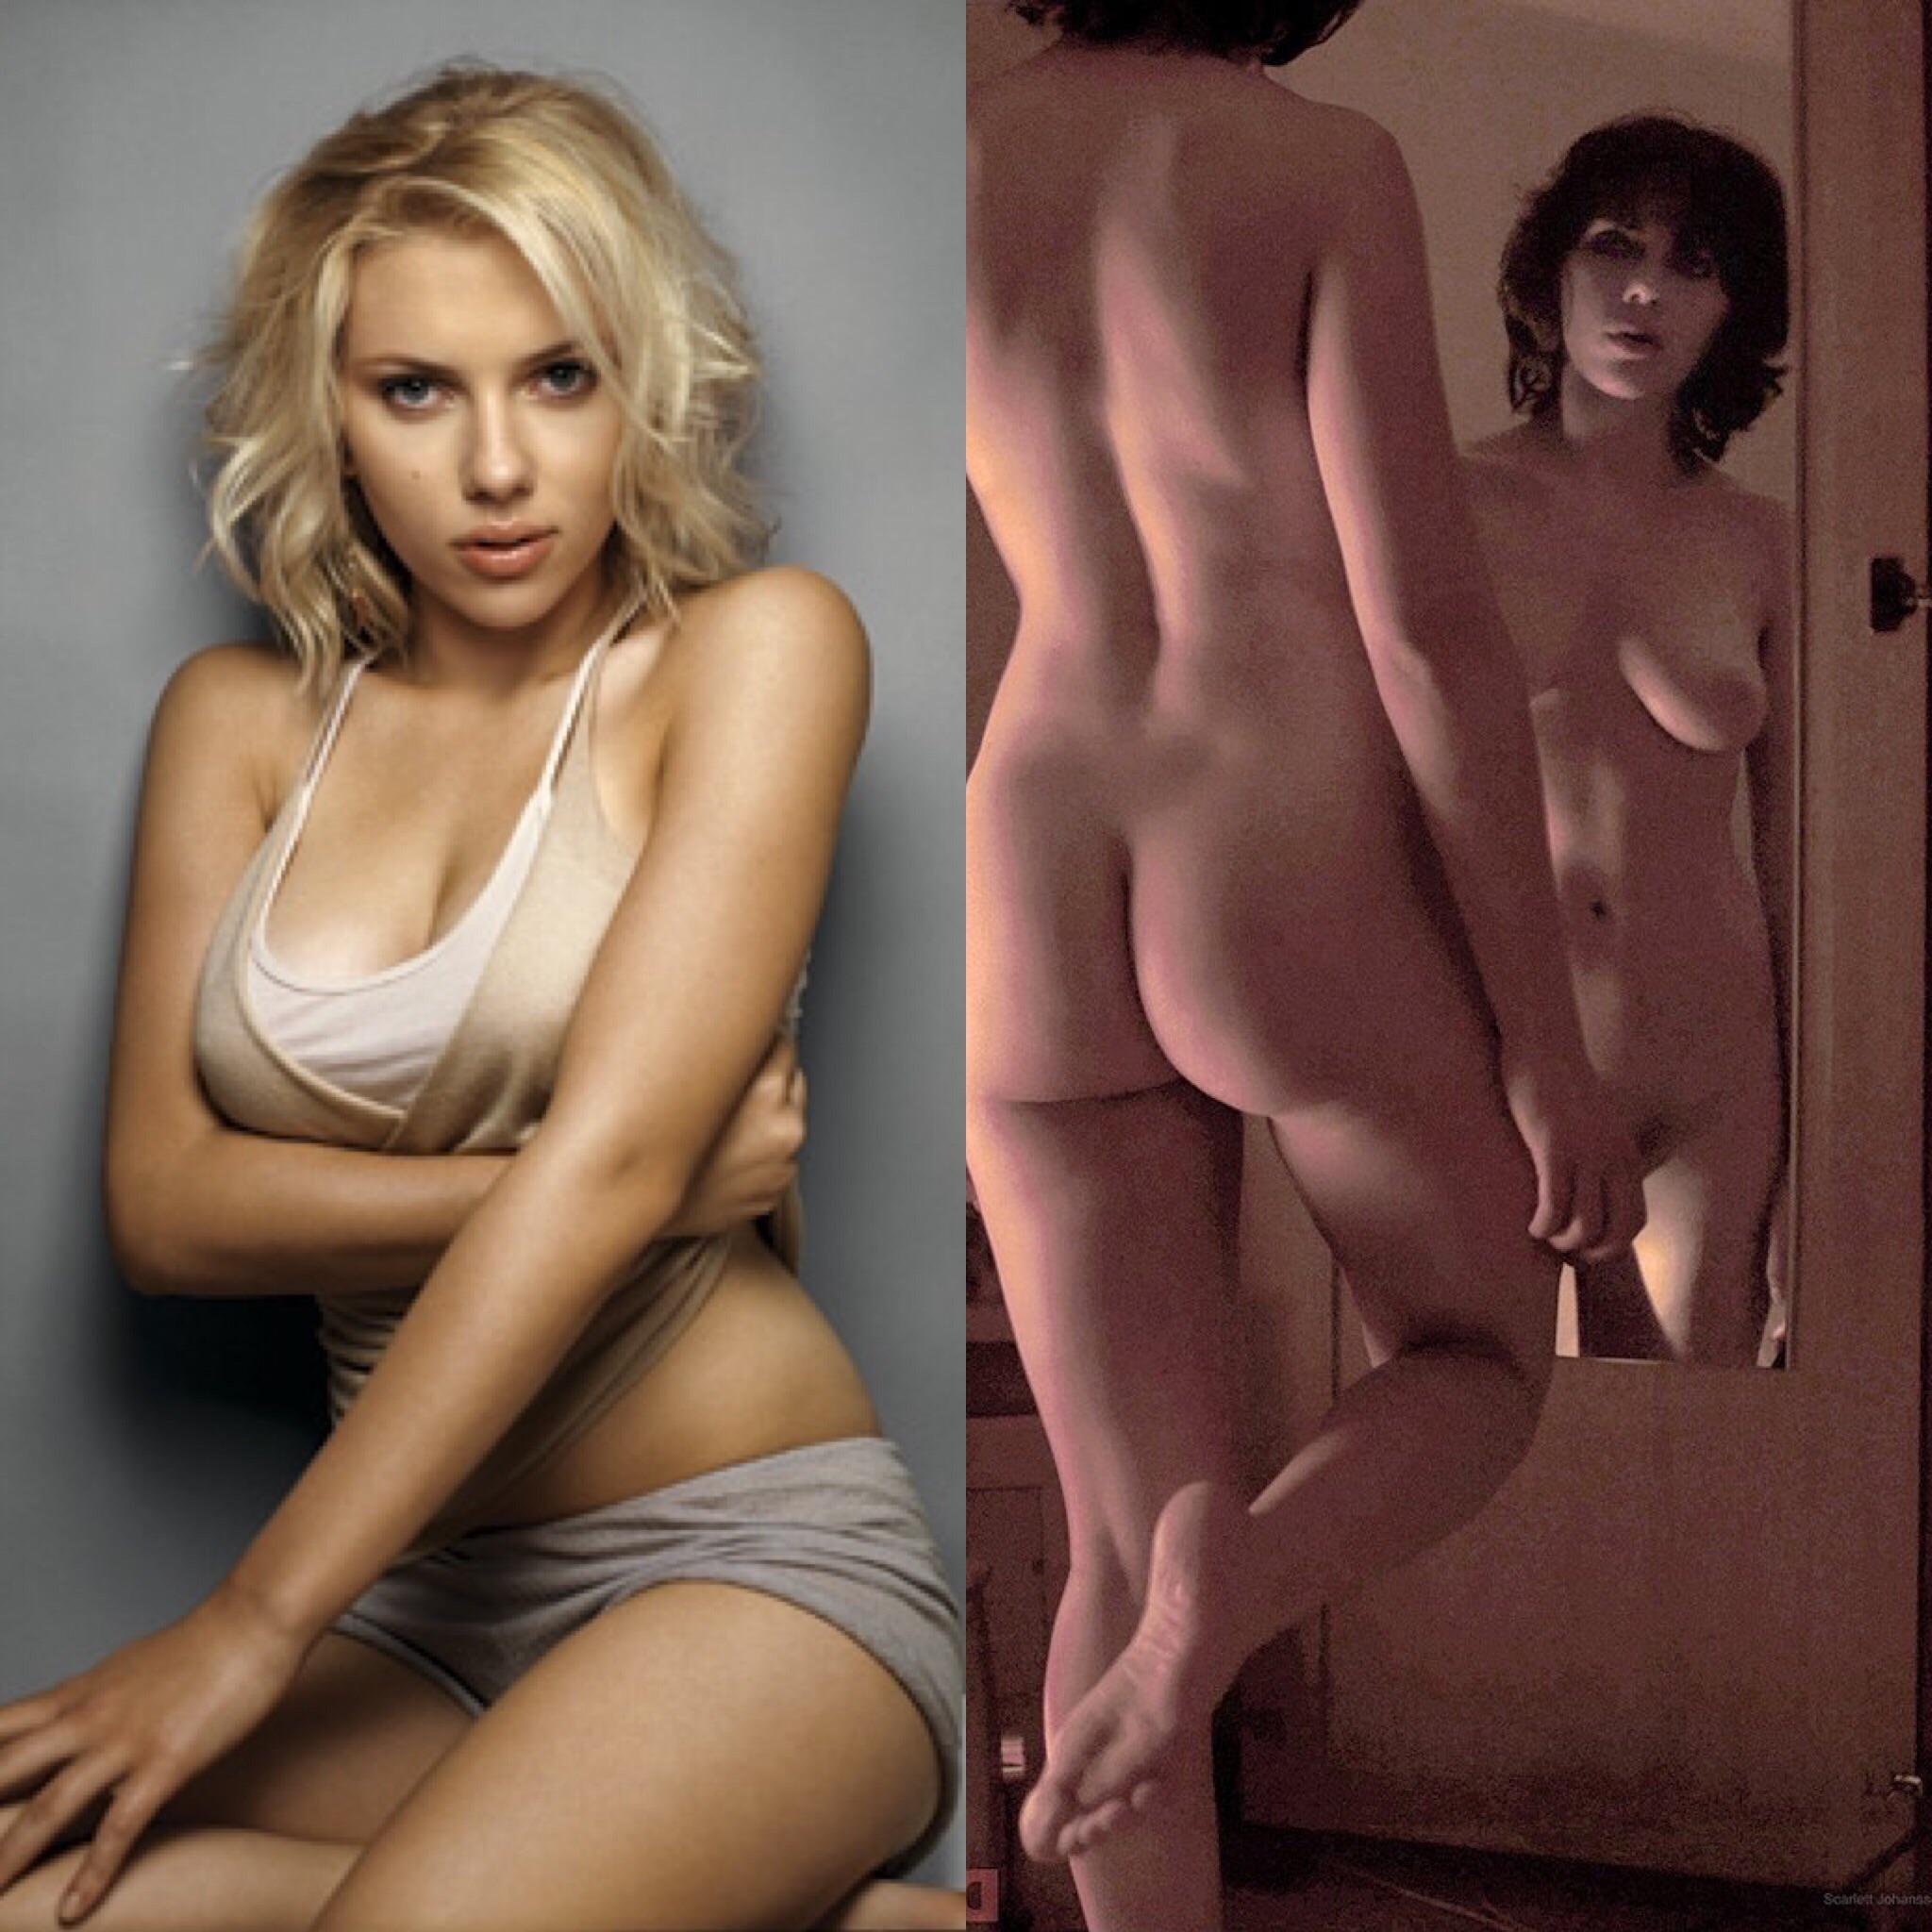 Scarlett Johansson clothed unclothed (1)